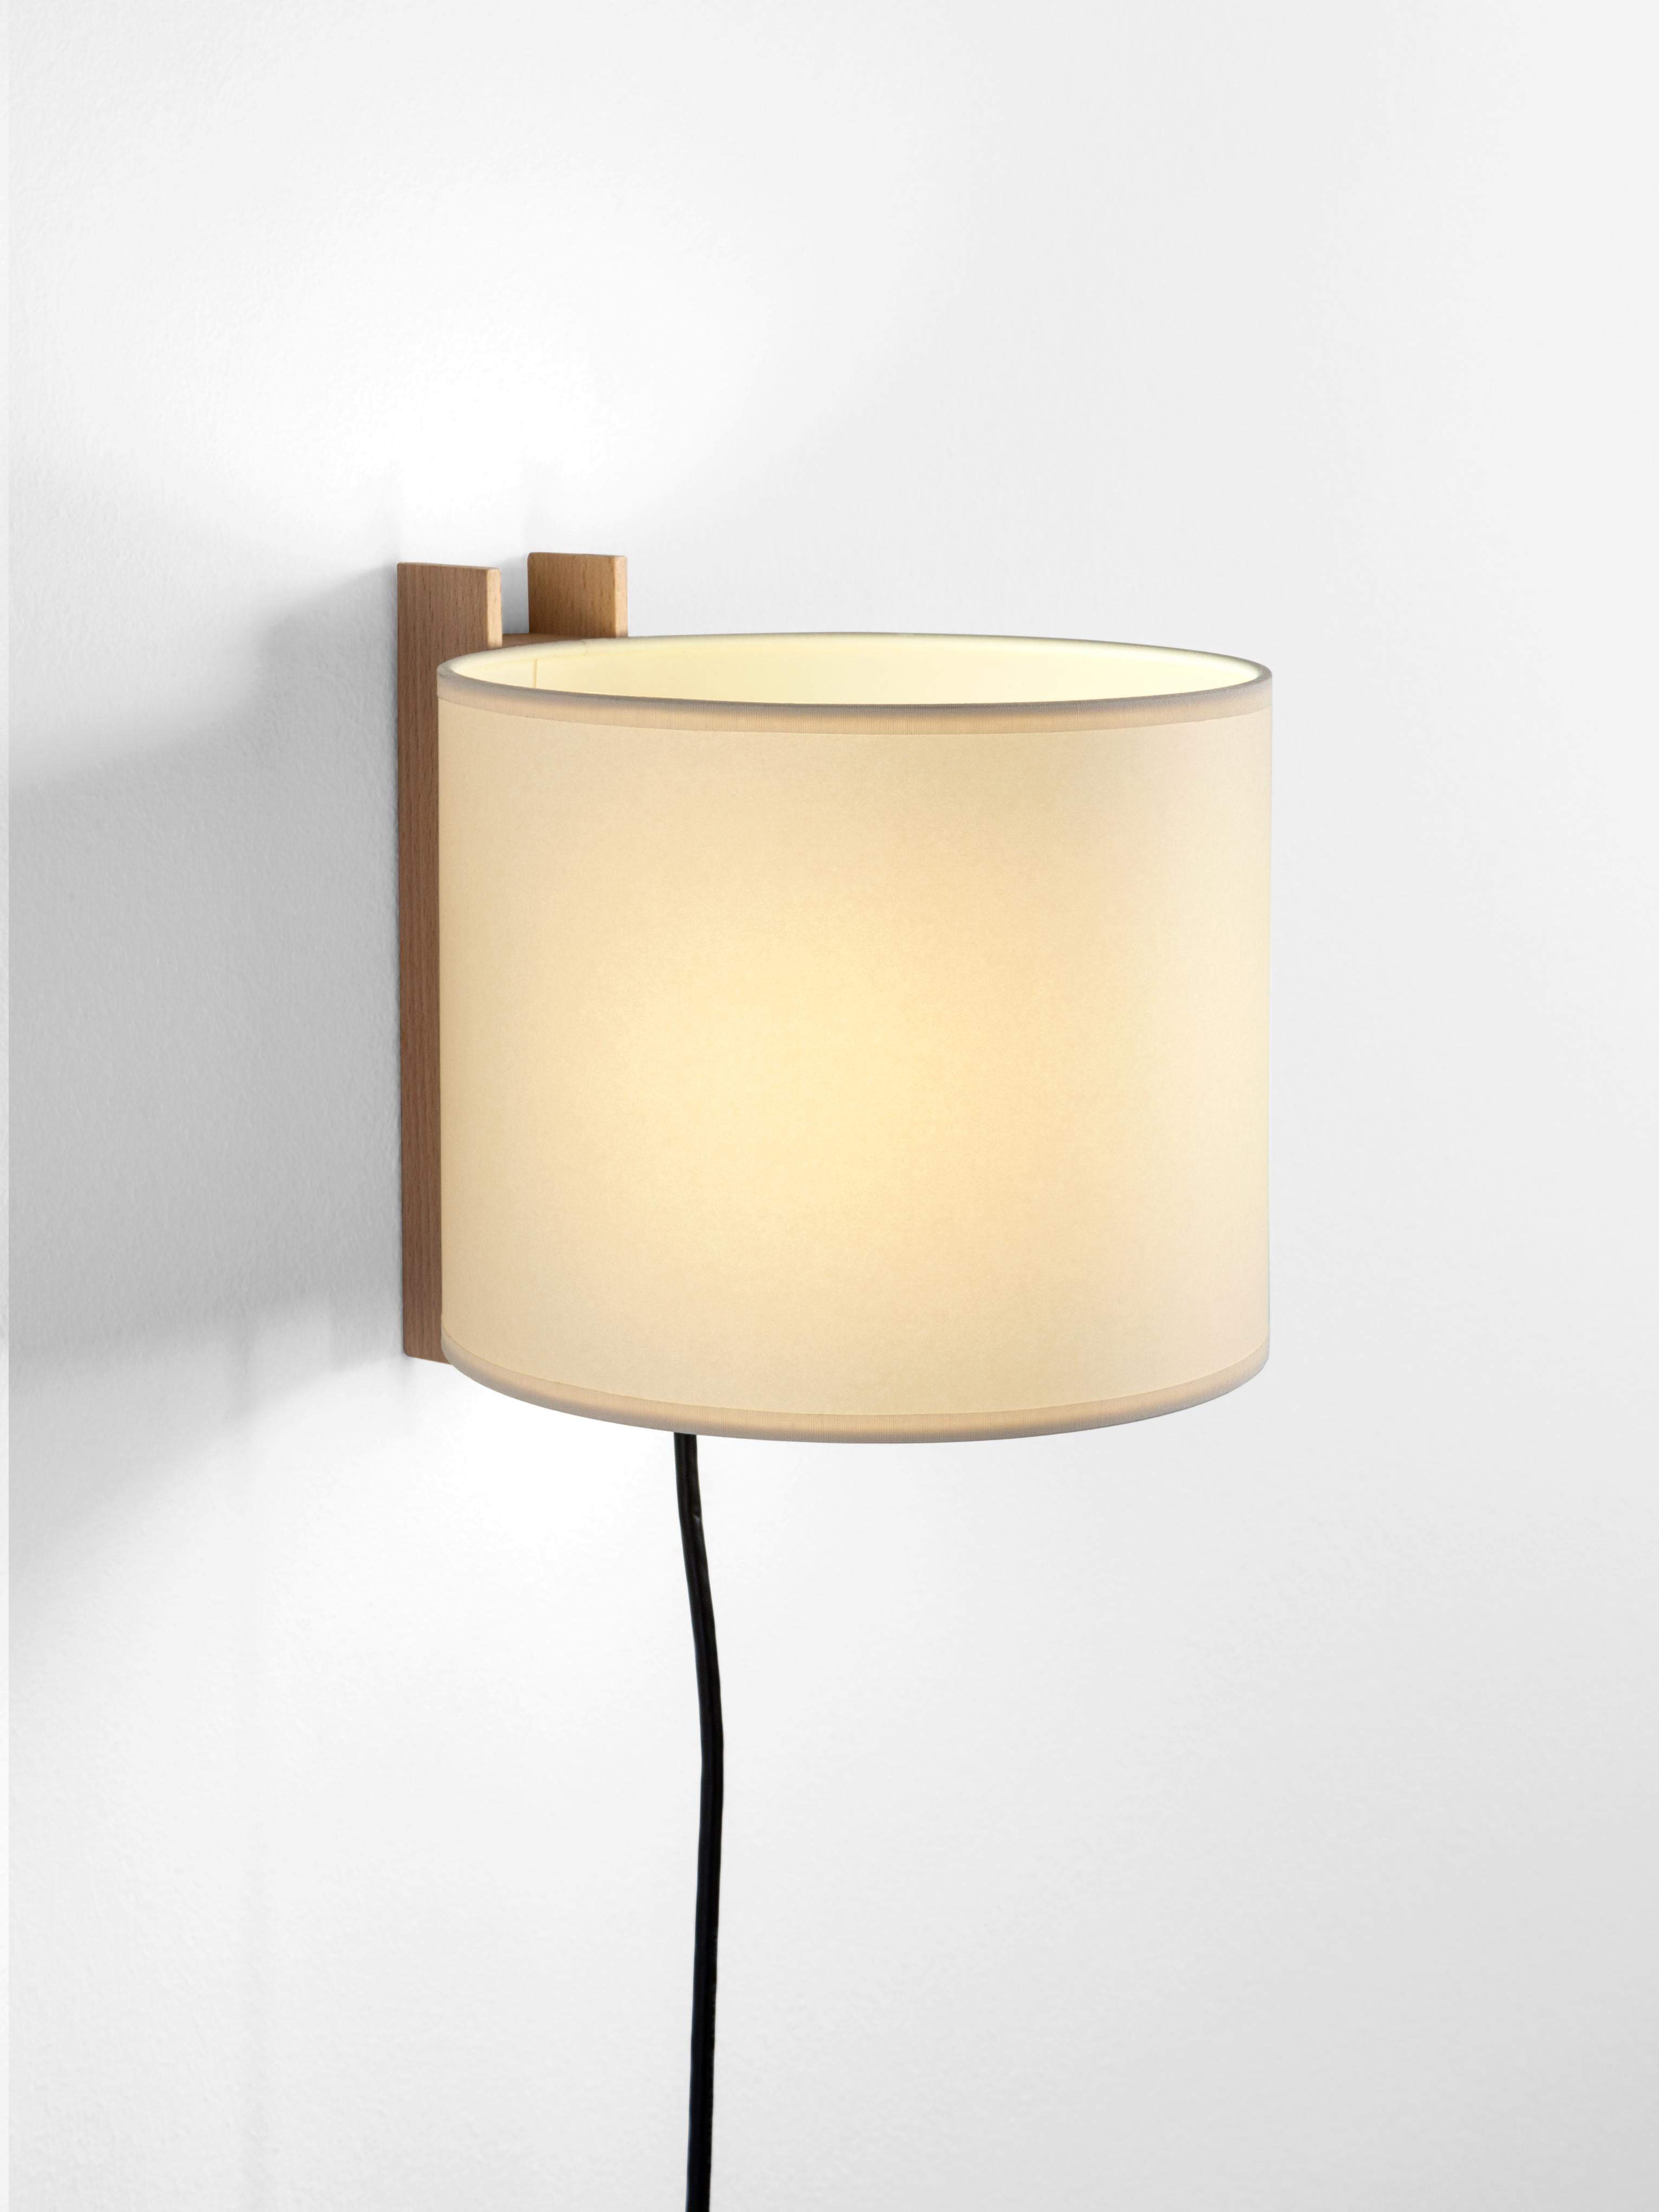 Beige and beech TMM Corto wall lamp by Miguel Milá
Dimensions: D 20 x W 23 x H 20 cm
Materials: Metal, beech wood, parchment lampshade.
With plug.
Available in beech or walnut and in white or beige lampshade.
Available with plug or direct